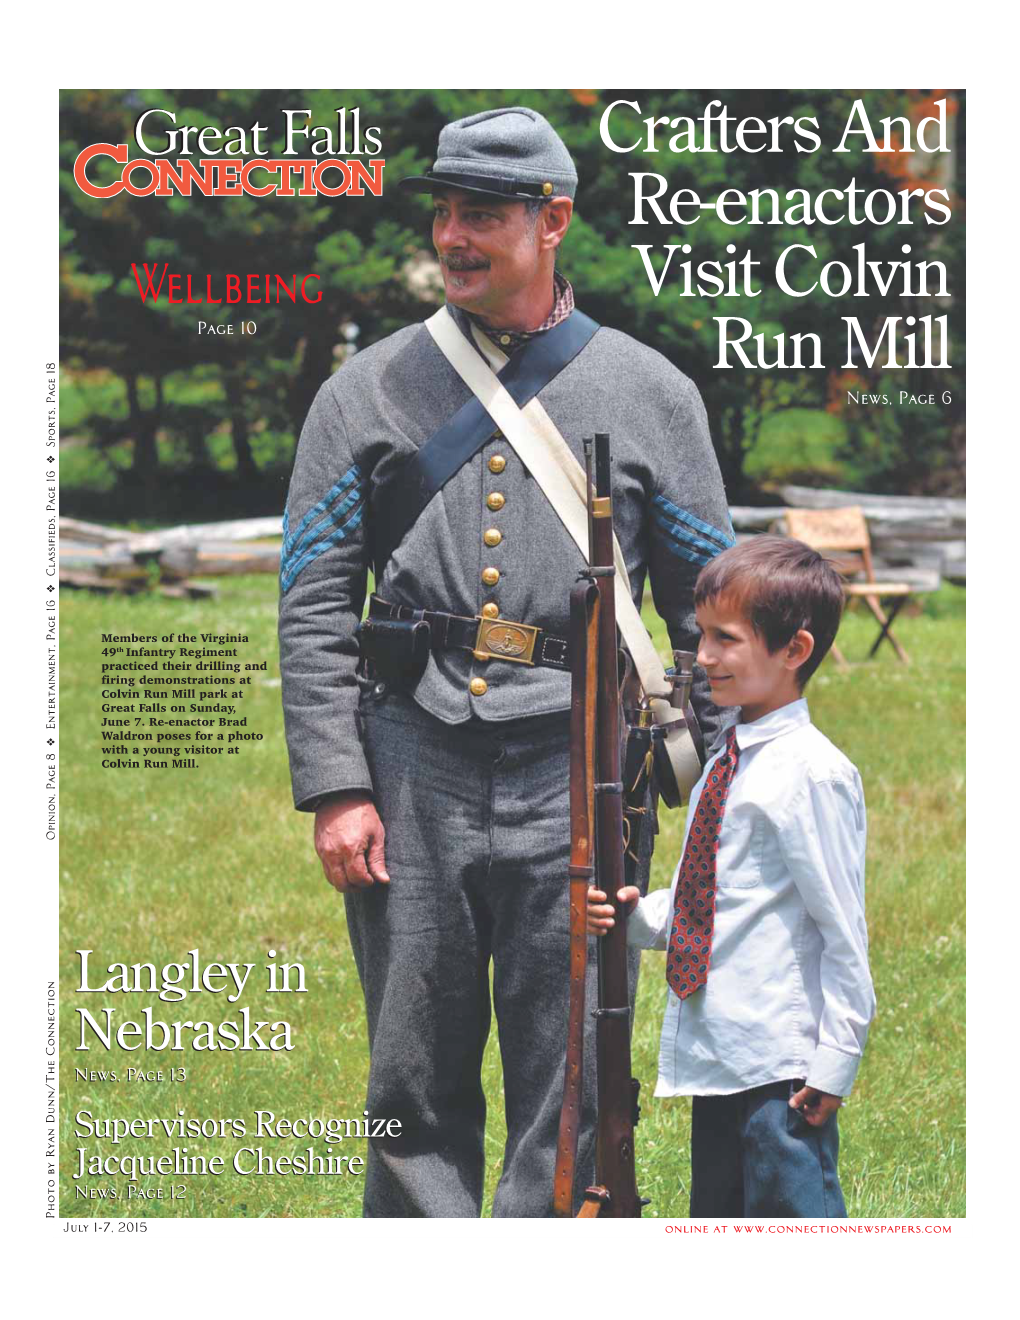 Crafters and Re-Enactors Visit Colvin Run Mill